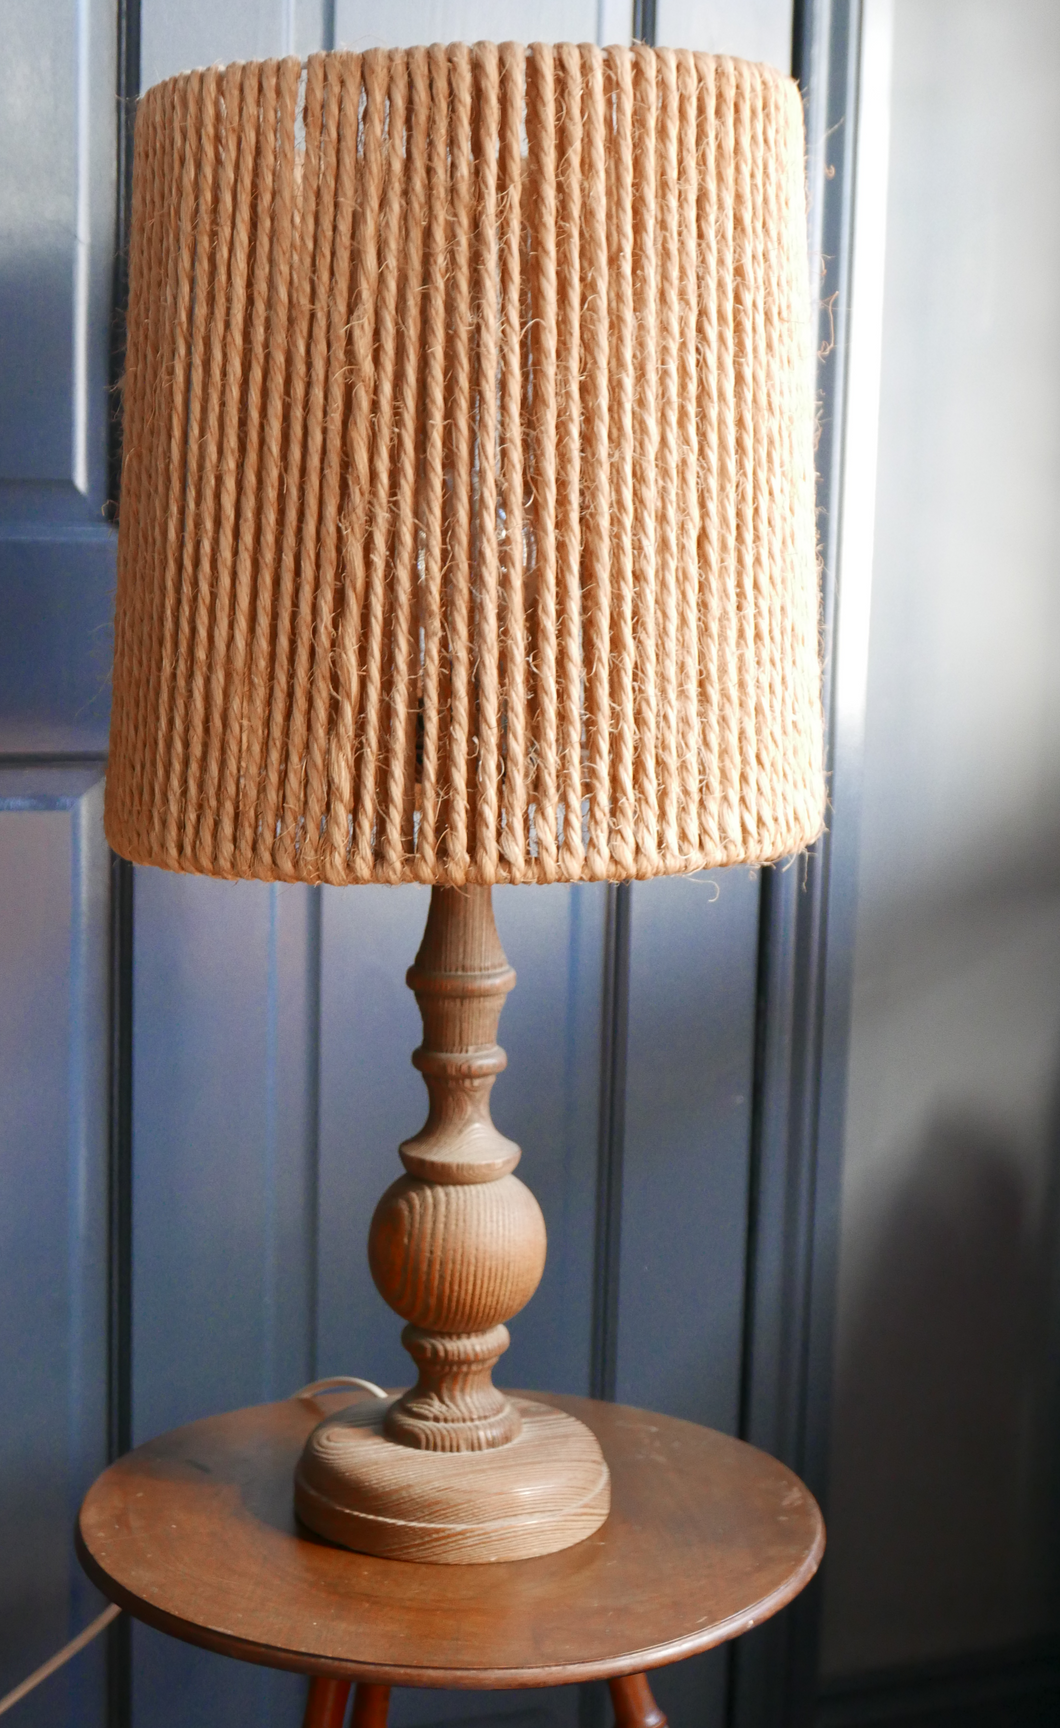 Vintage wooden turned lamp with rope shade